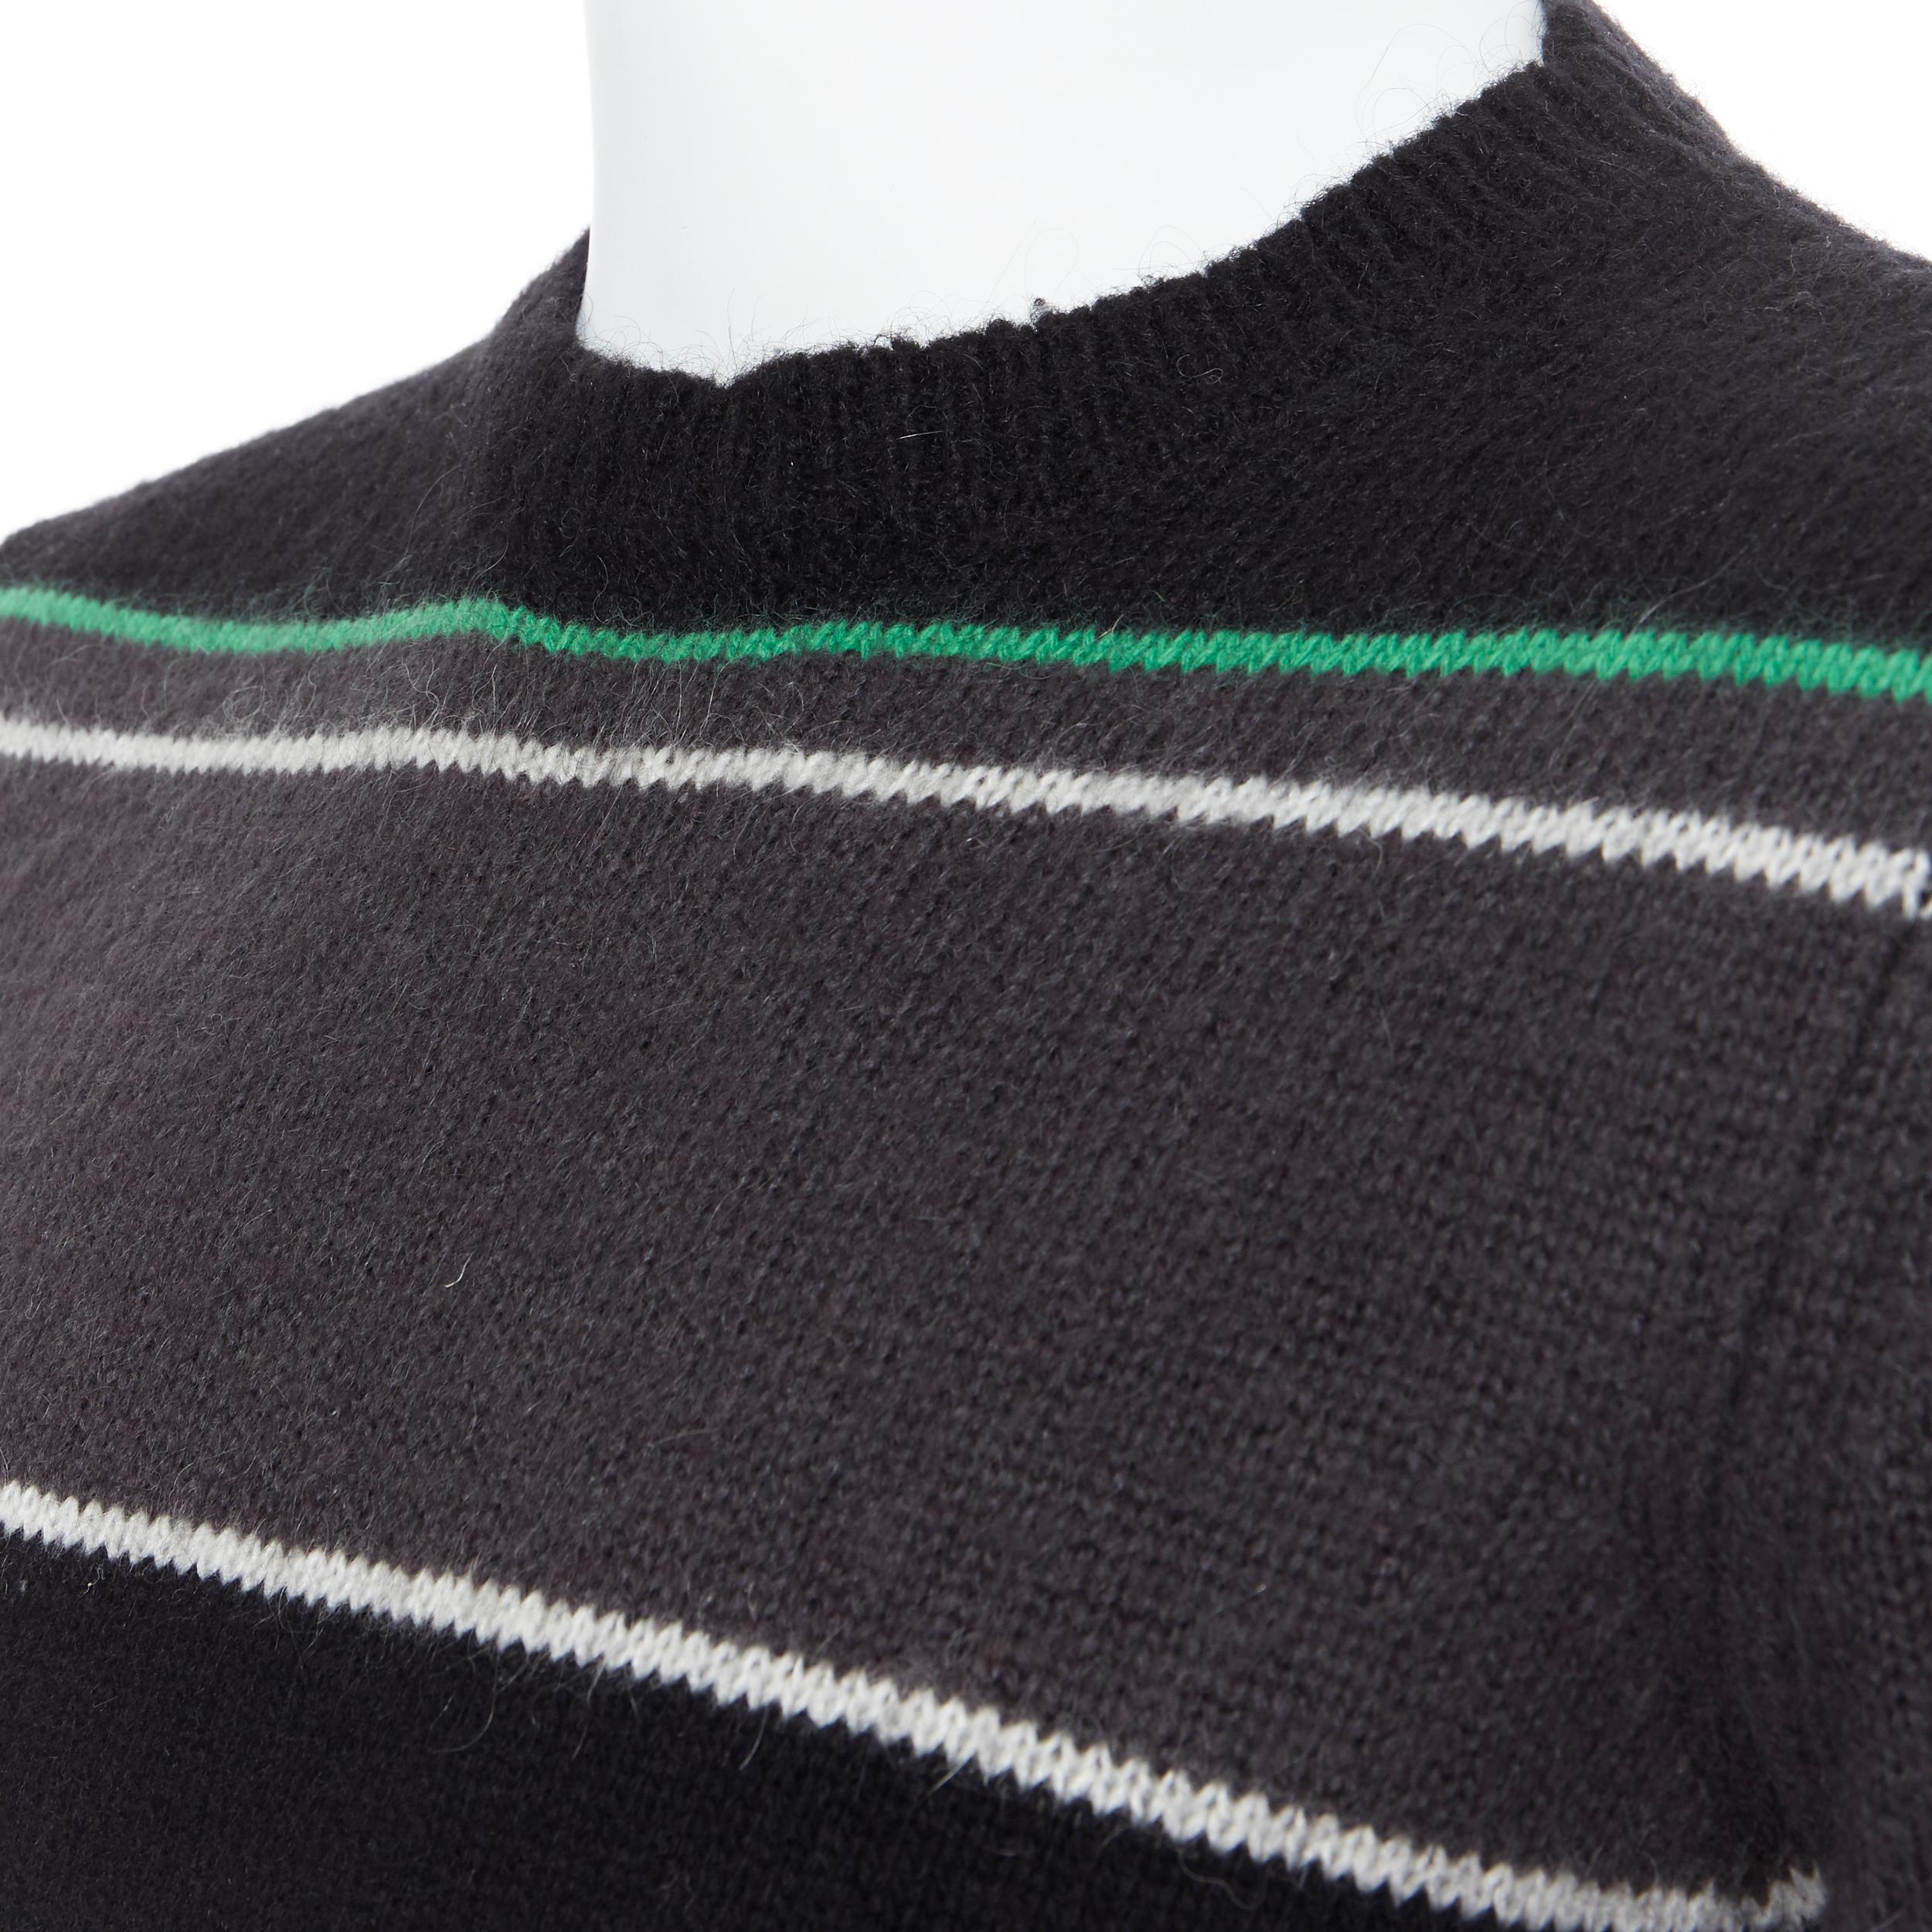 RAF SIMONS black grey merino wool blend striped long sleeve sweater S
Brand: Raf Simons
Designer: Raf Simons
Model Name / Style: Wool sweater
Material: Wool blend
Color: Black
Pattern: Striped
Extra Detail: Long sleeve. Round neck neckline.
Made in: